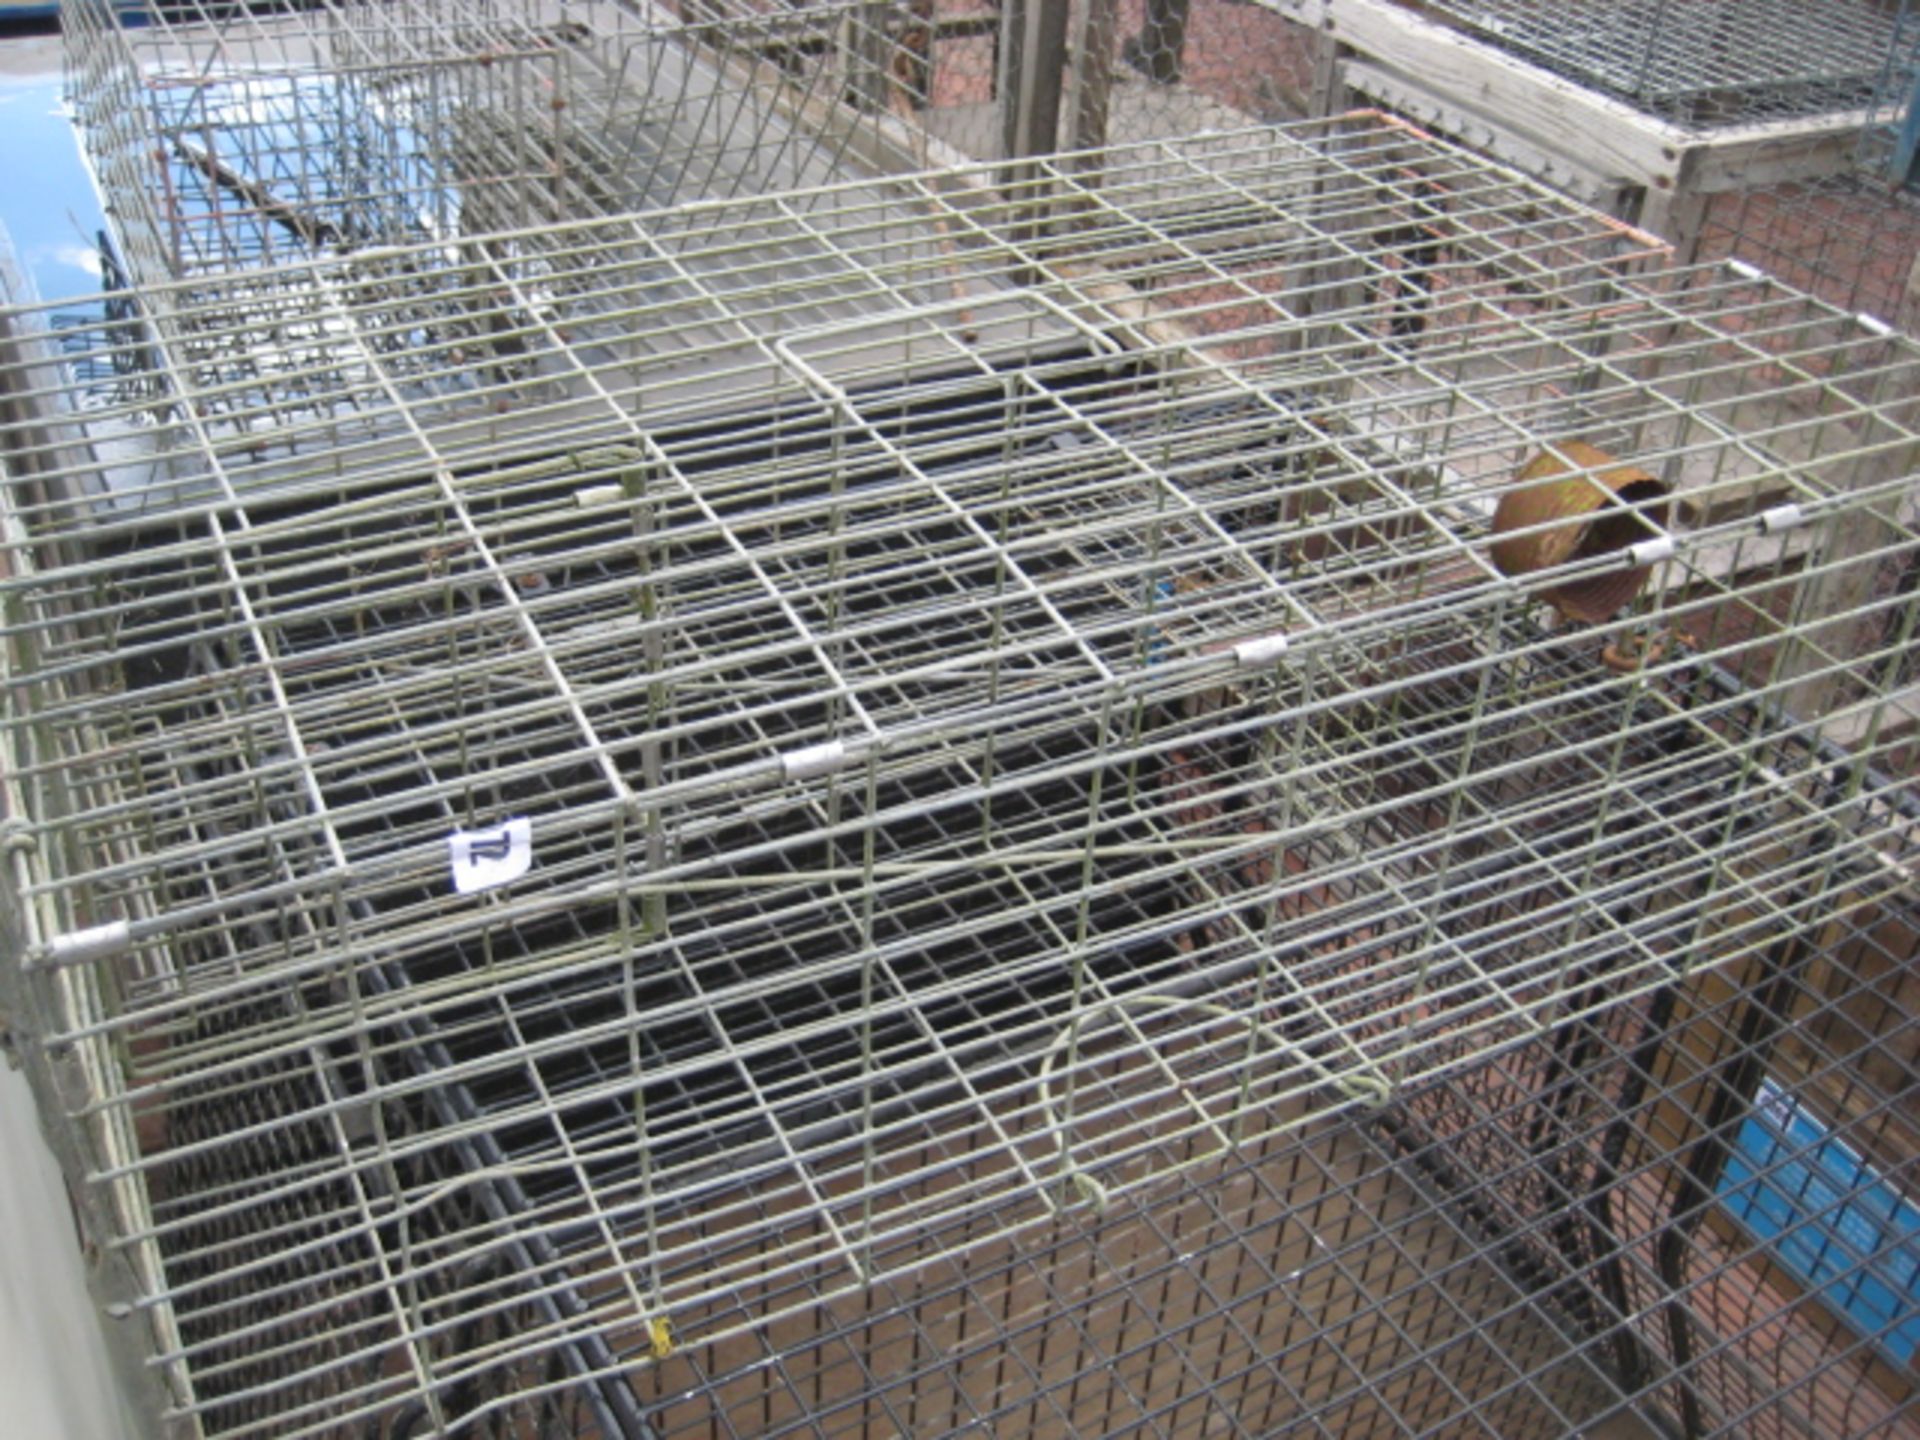 8 various galvanized wire cage traps